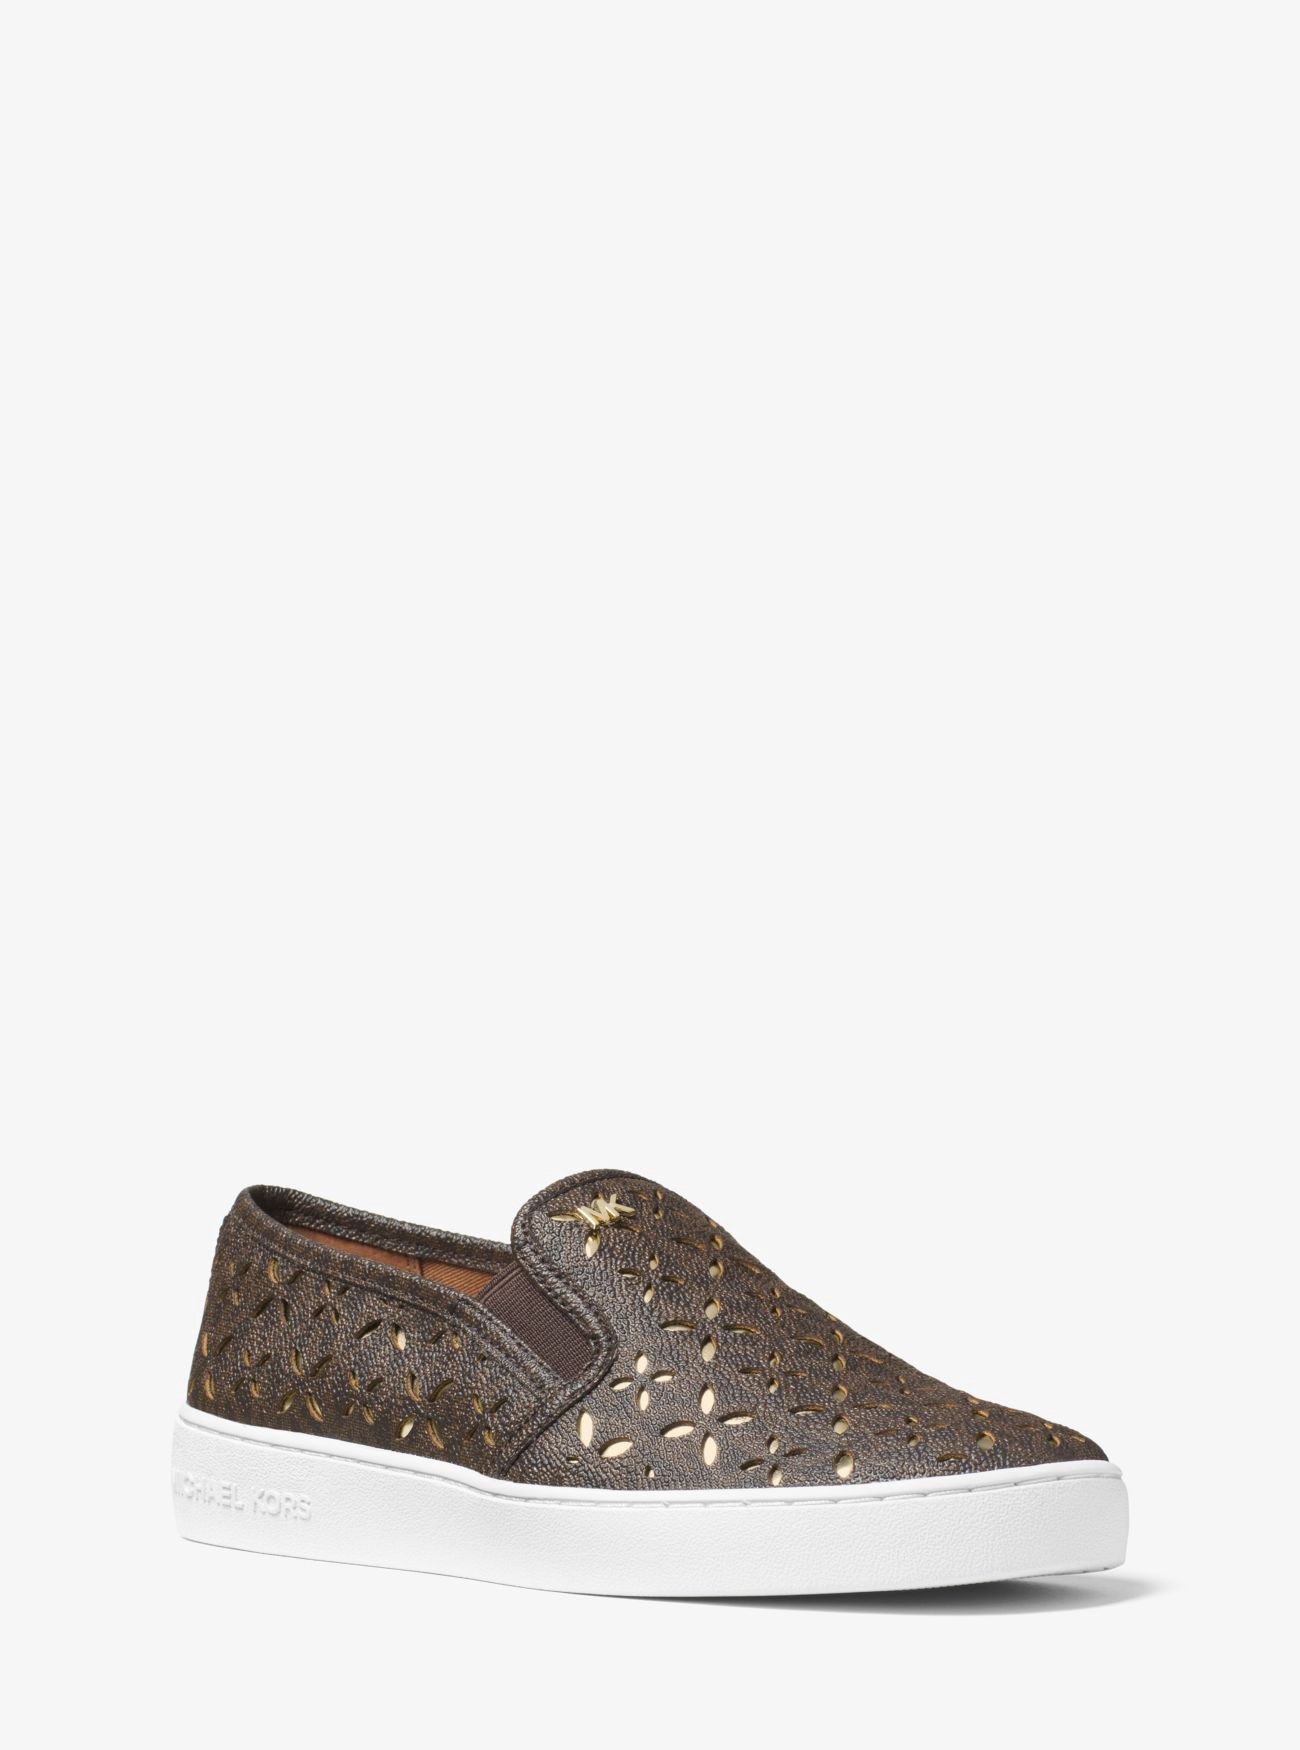 michael kors sneakers brown and gold